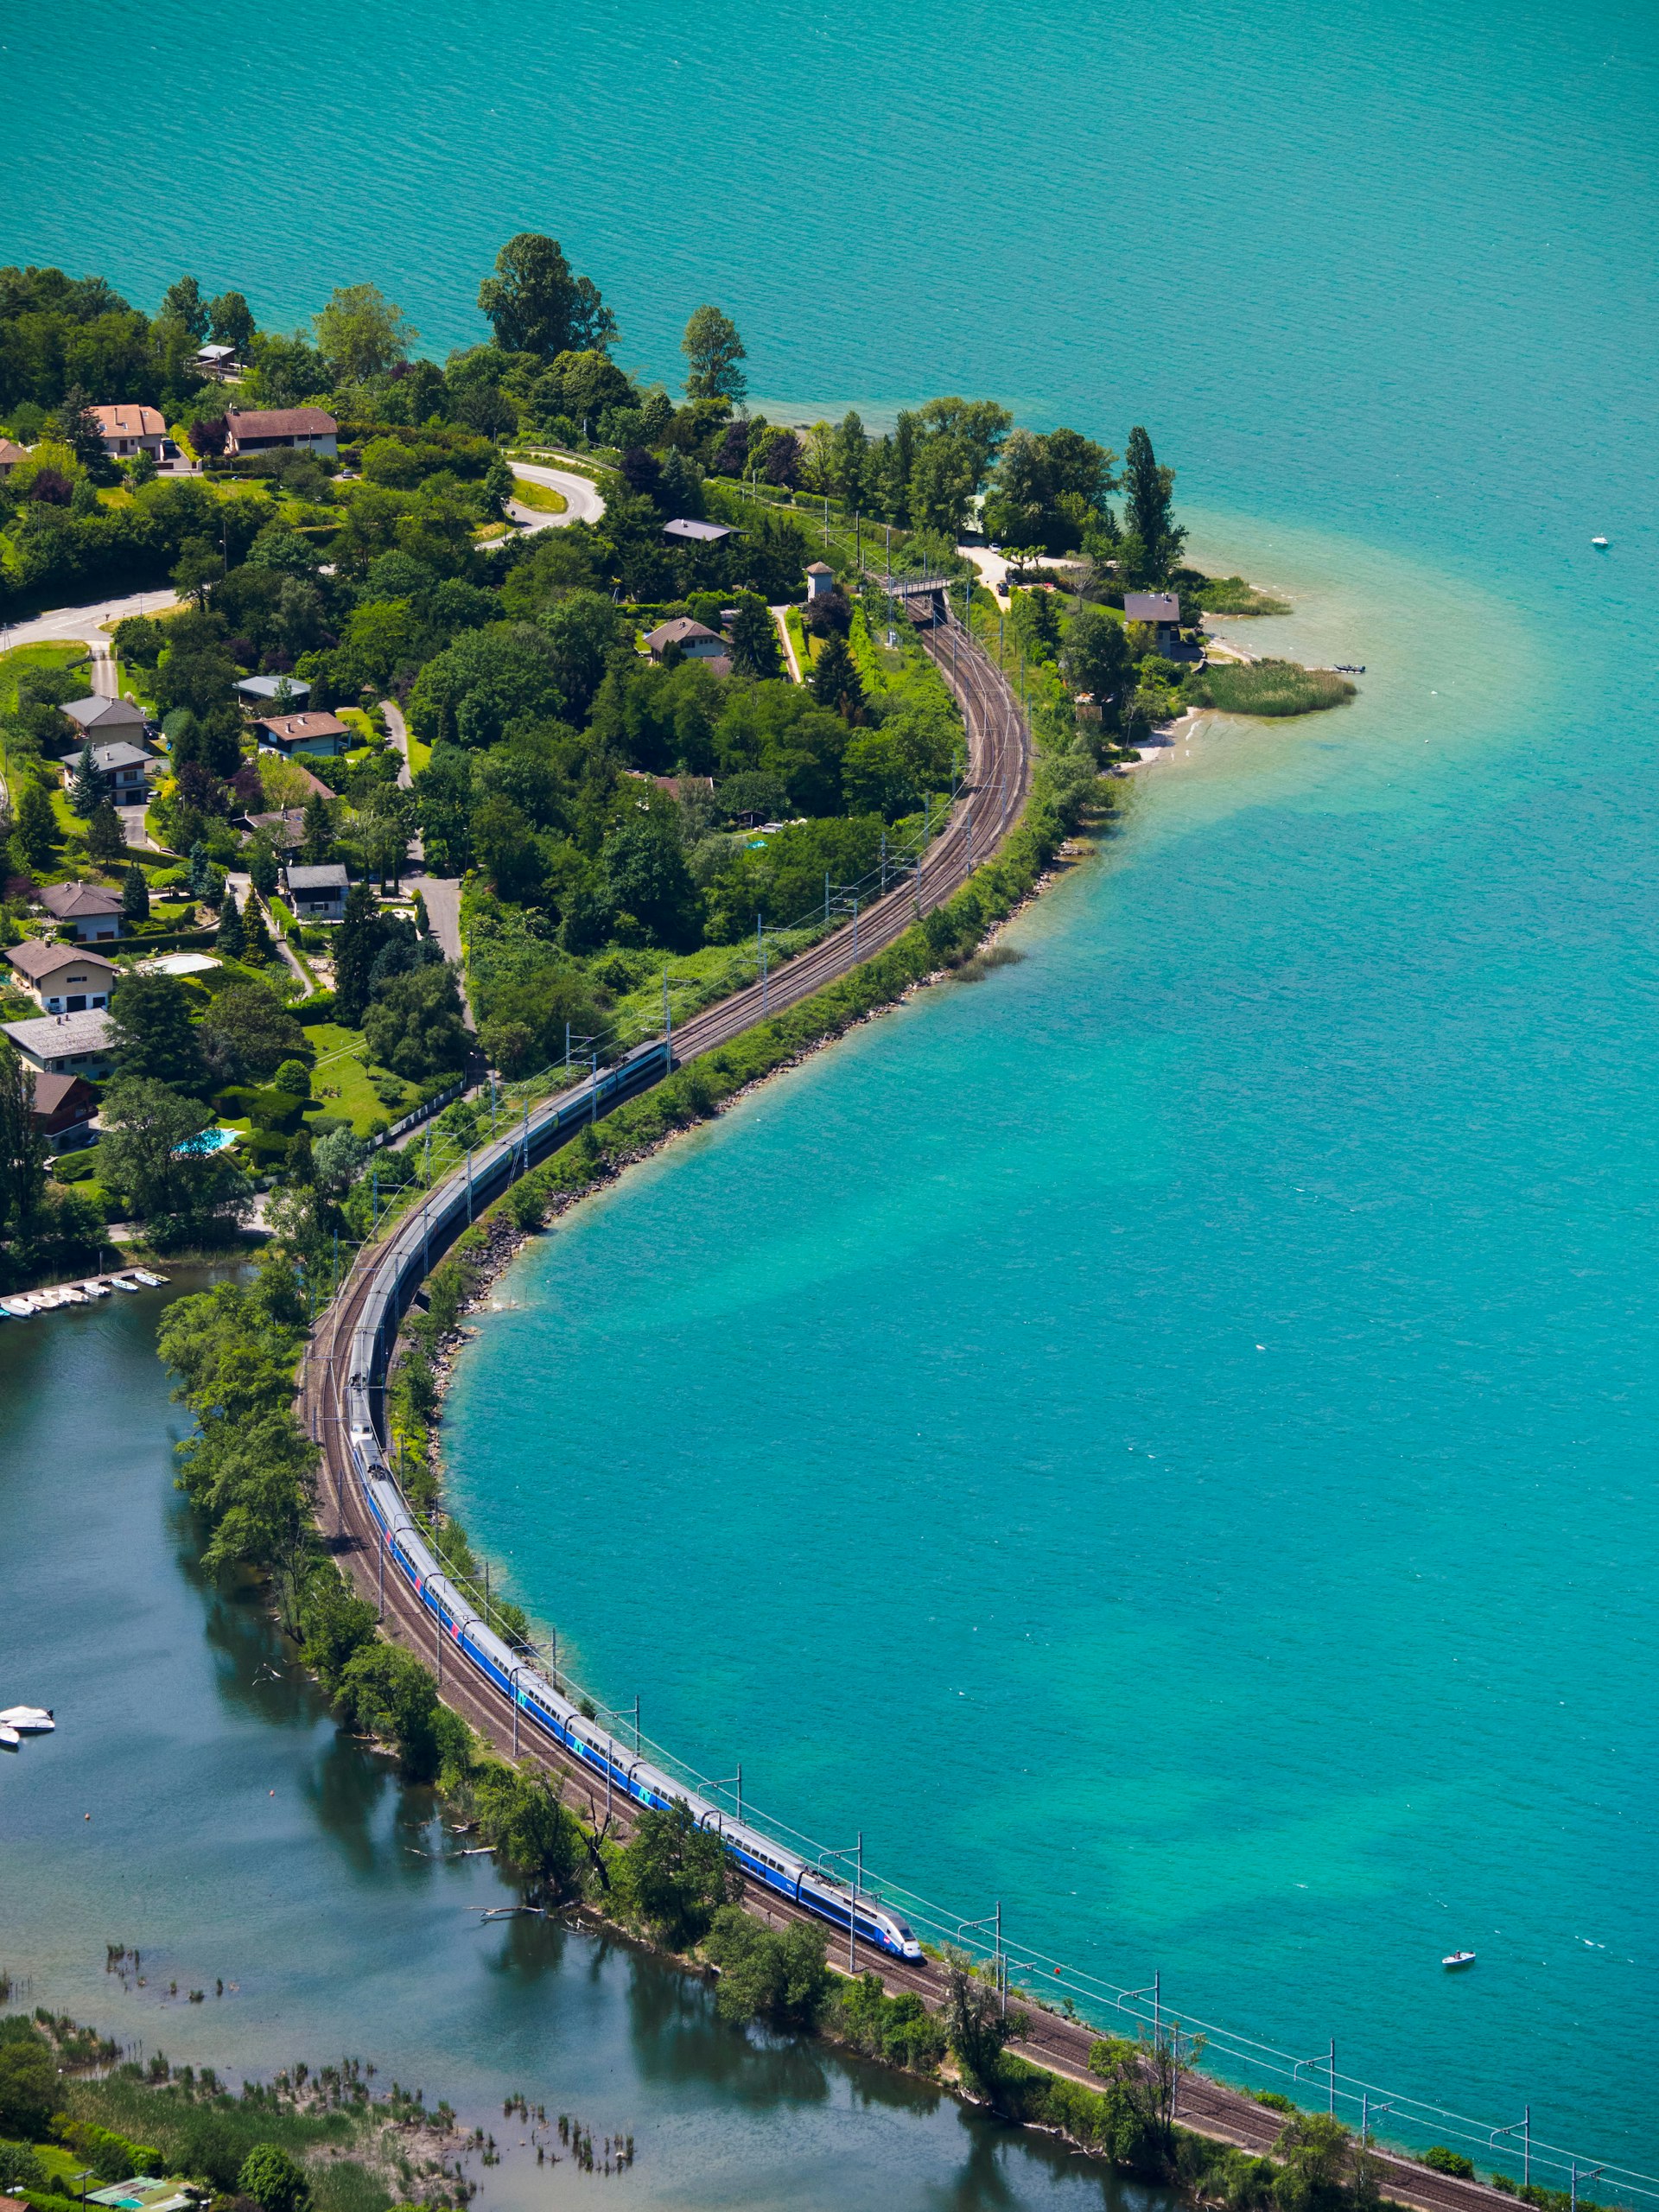 An aerial shot of a trainline with a bridge over a body of water